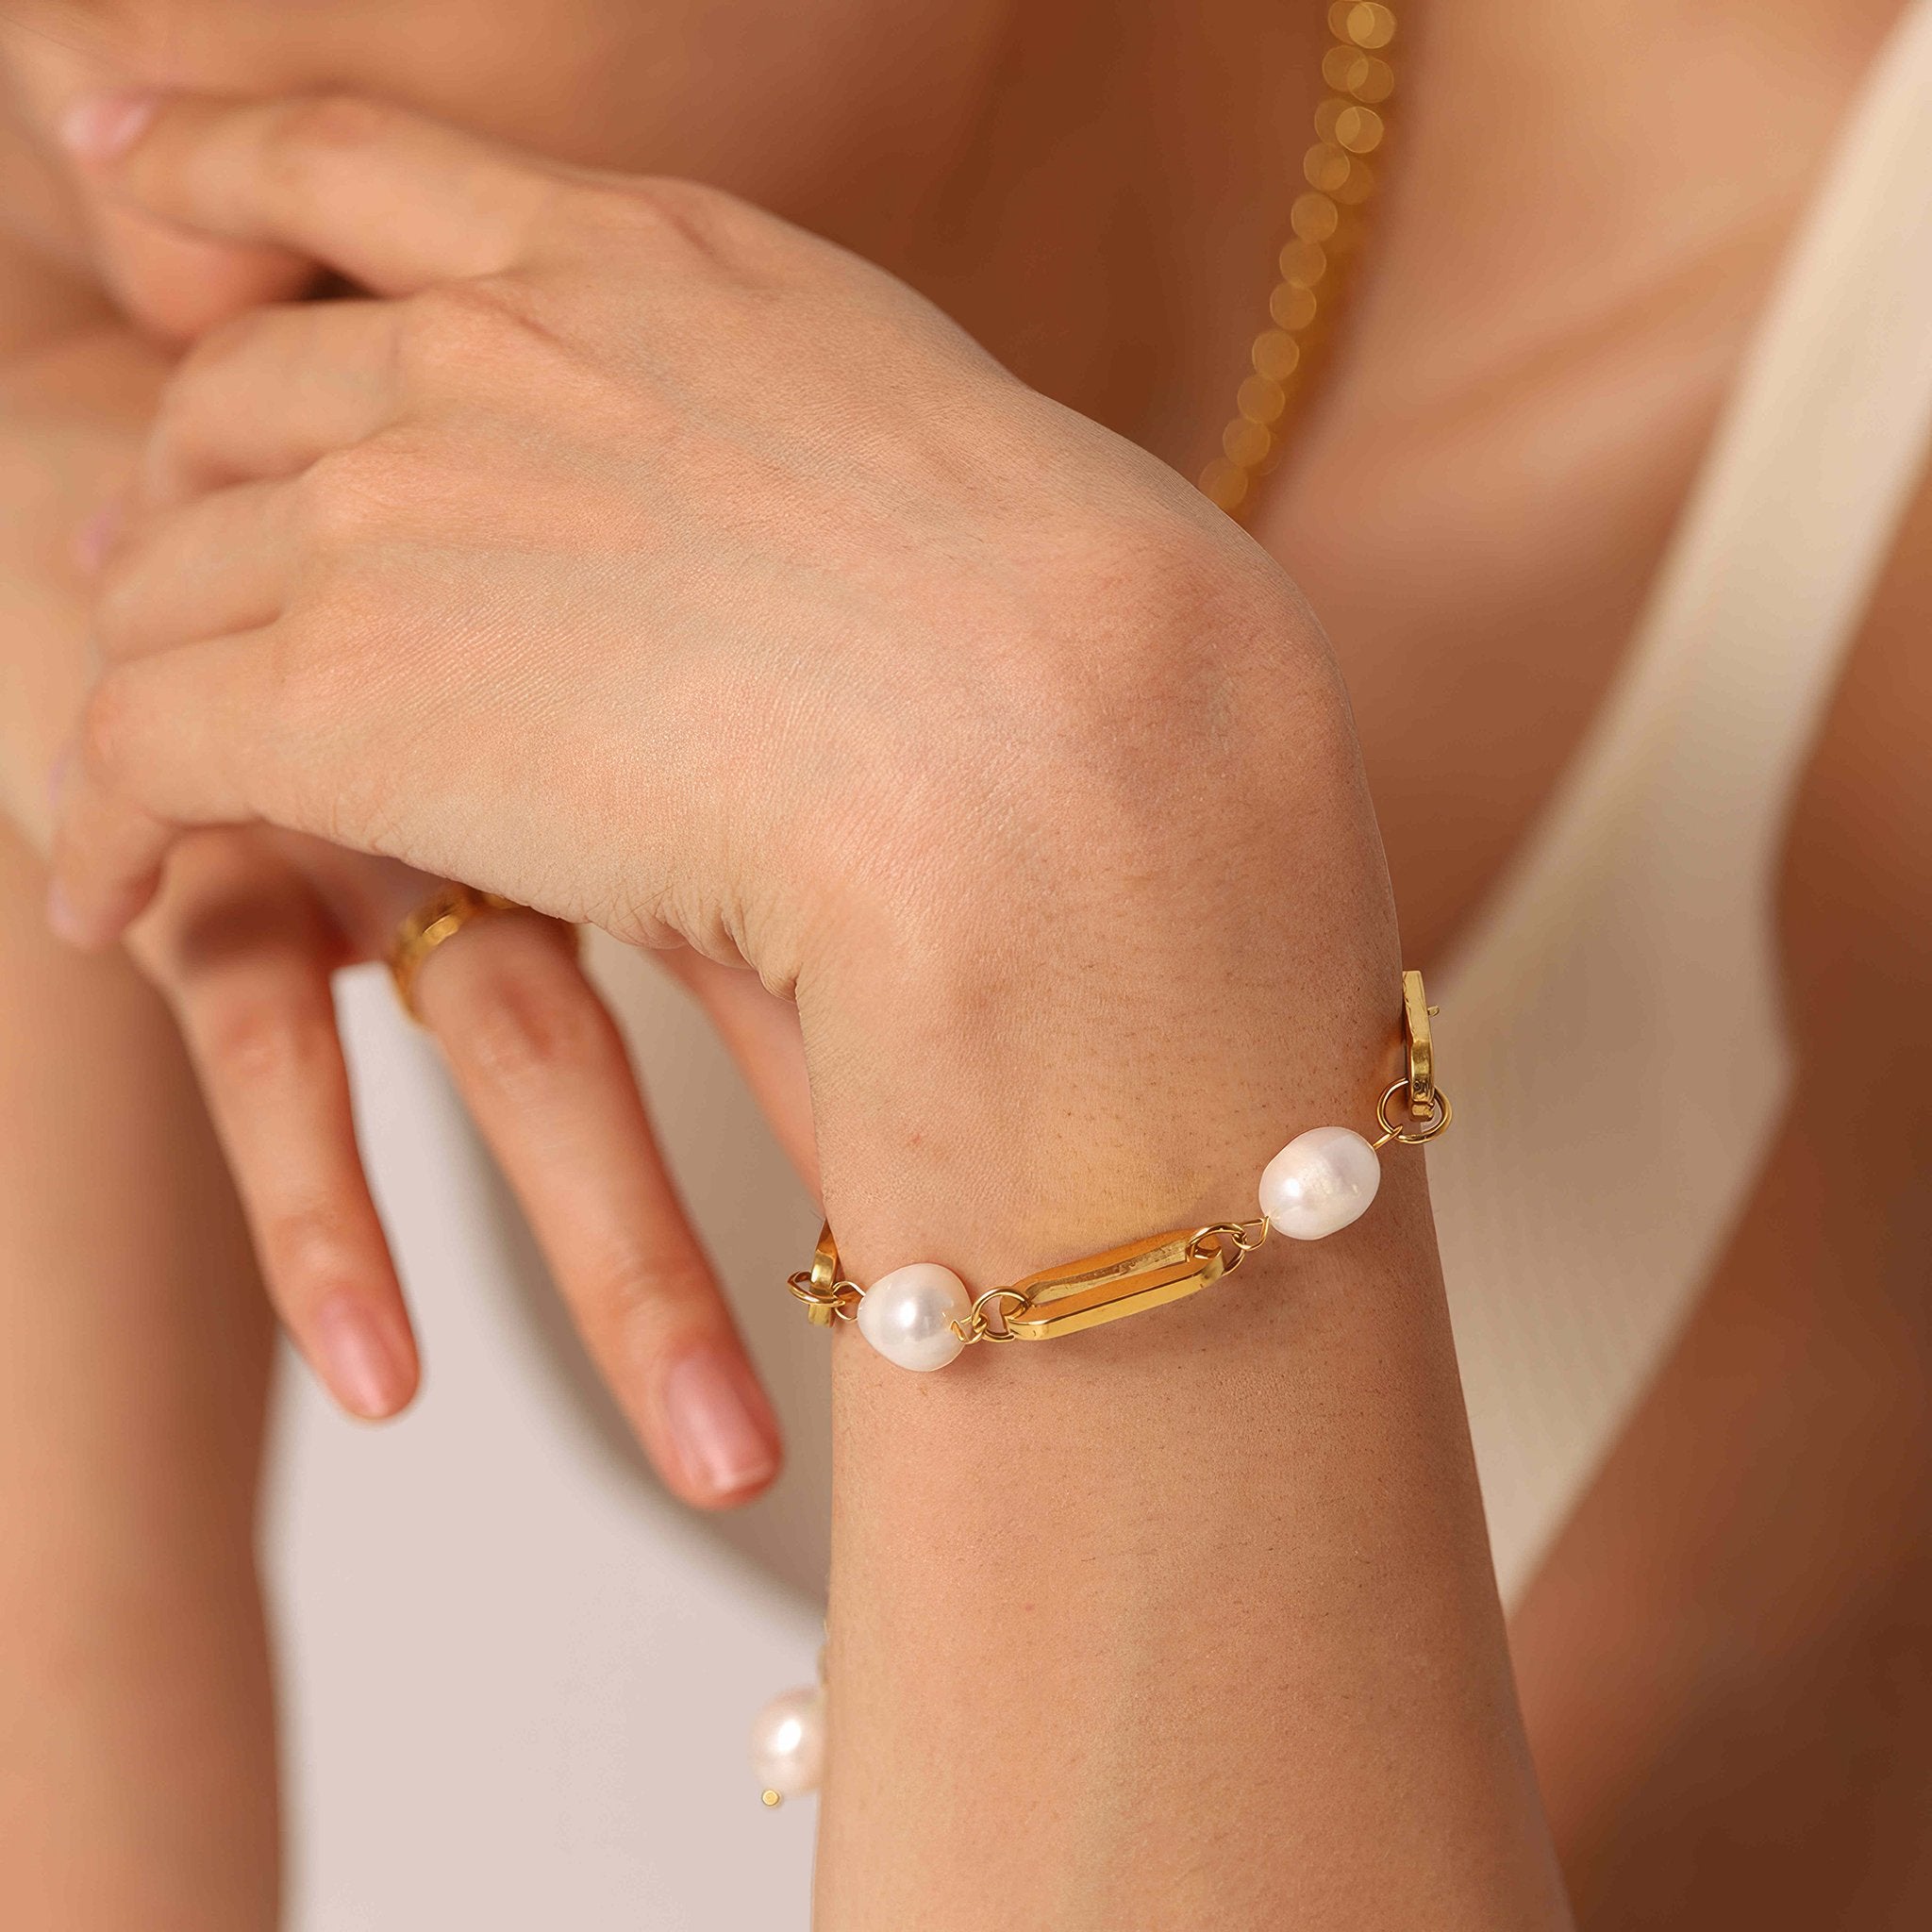 Baroque Pearl Bracelet with Rectangular Chain Spacers - Nobbier - Bracelet - 18K Gold And Titanium PVD Coated Jewelry